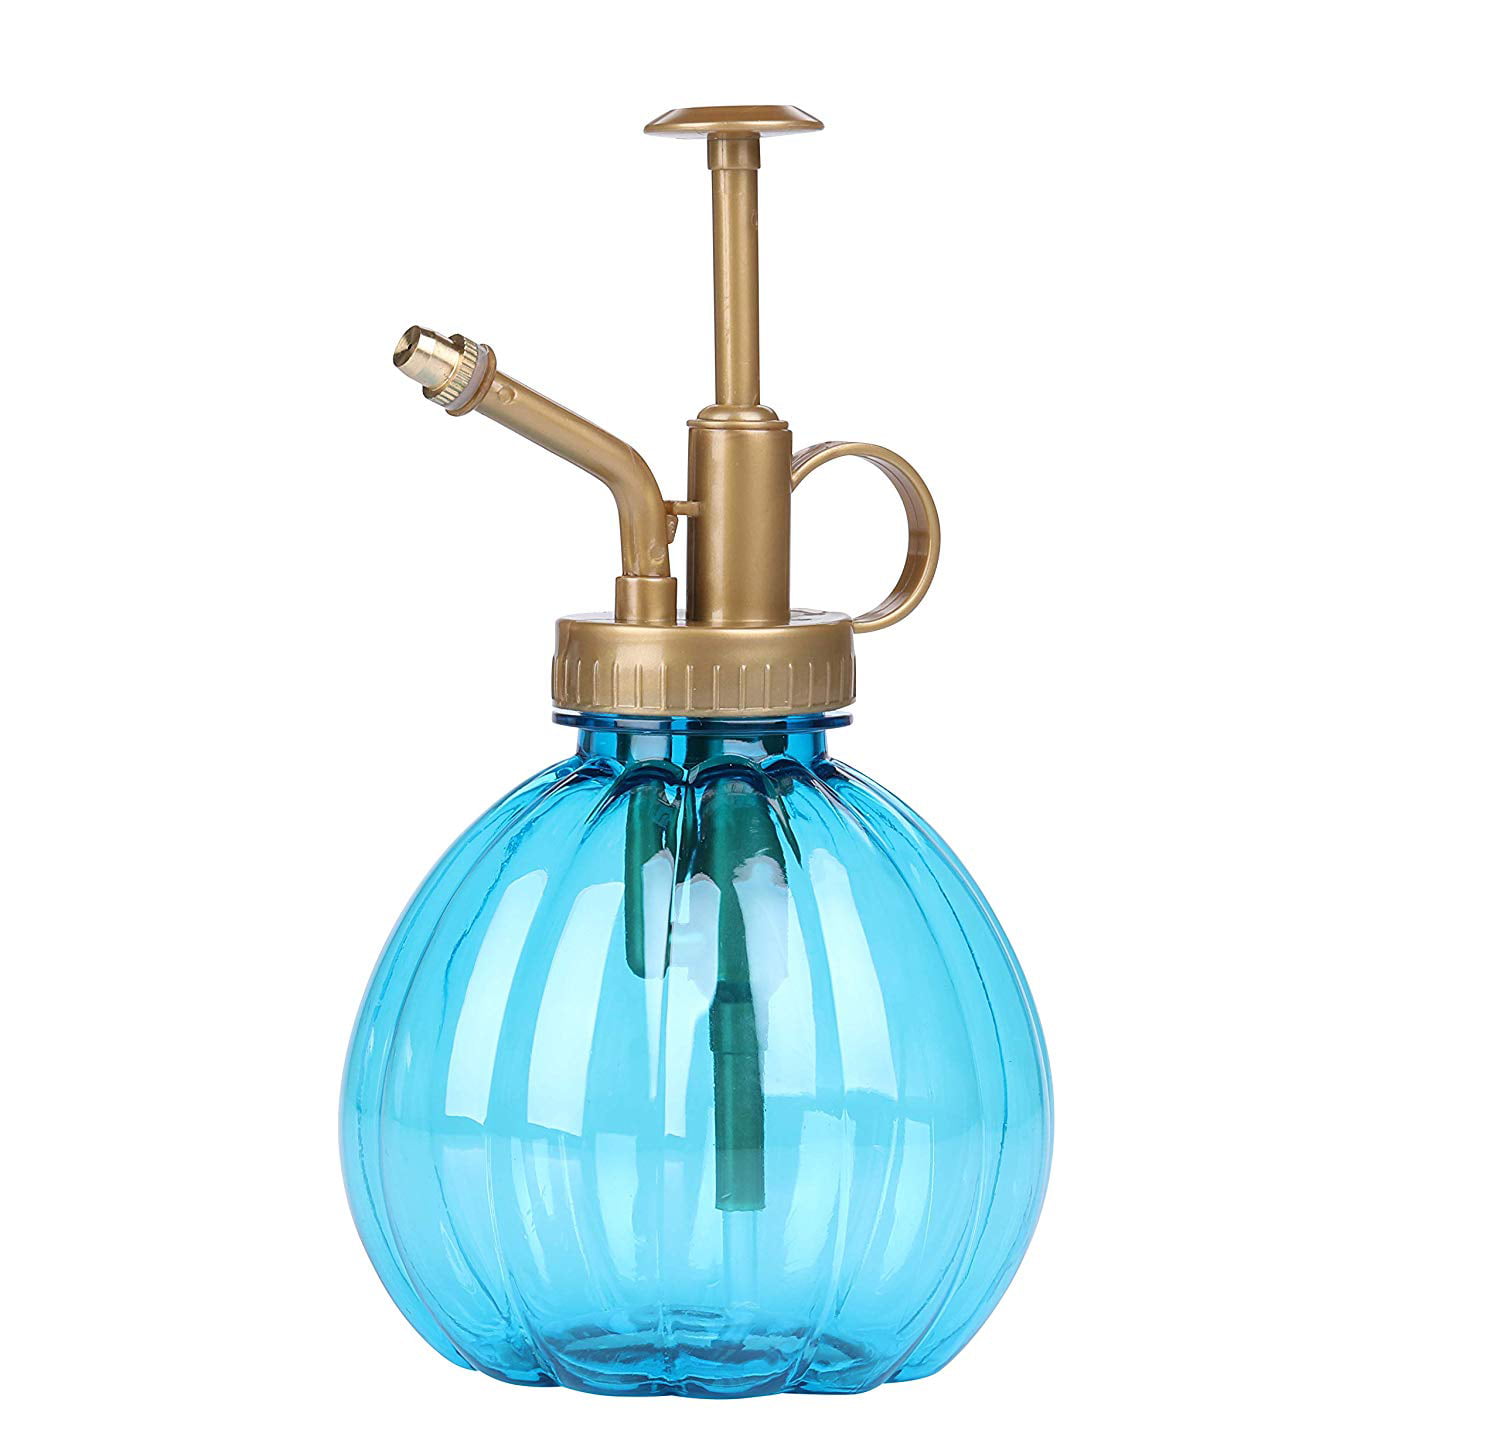 Small Plant Mister Vintage Decor Plastic Water Spray Bottle Watering Pot Chic 